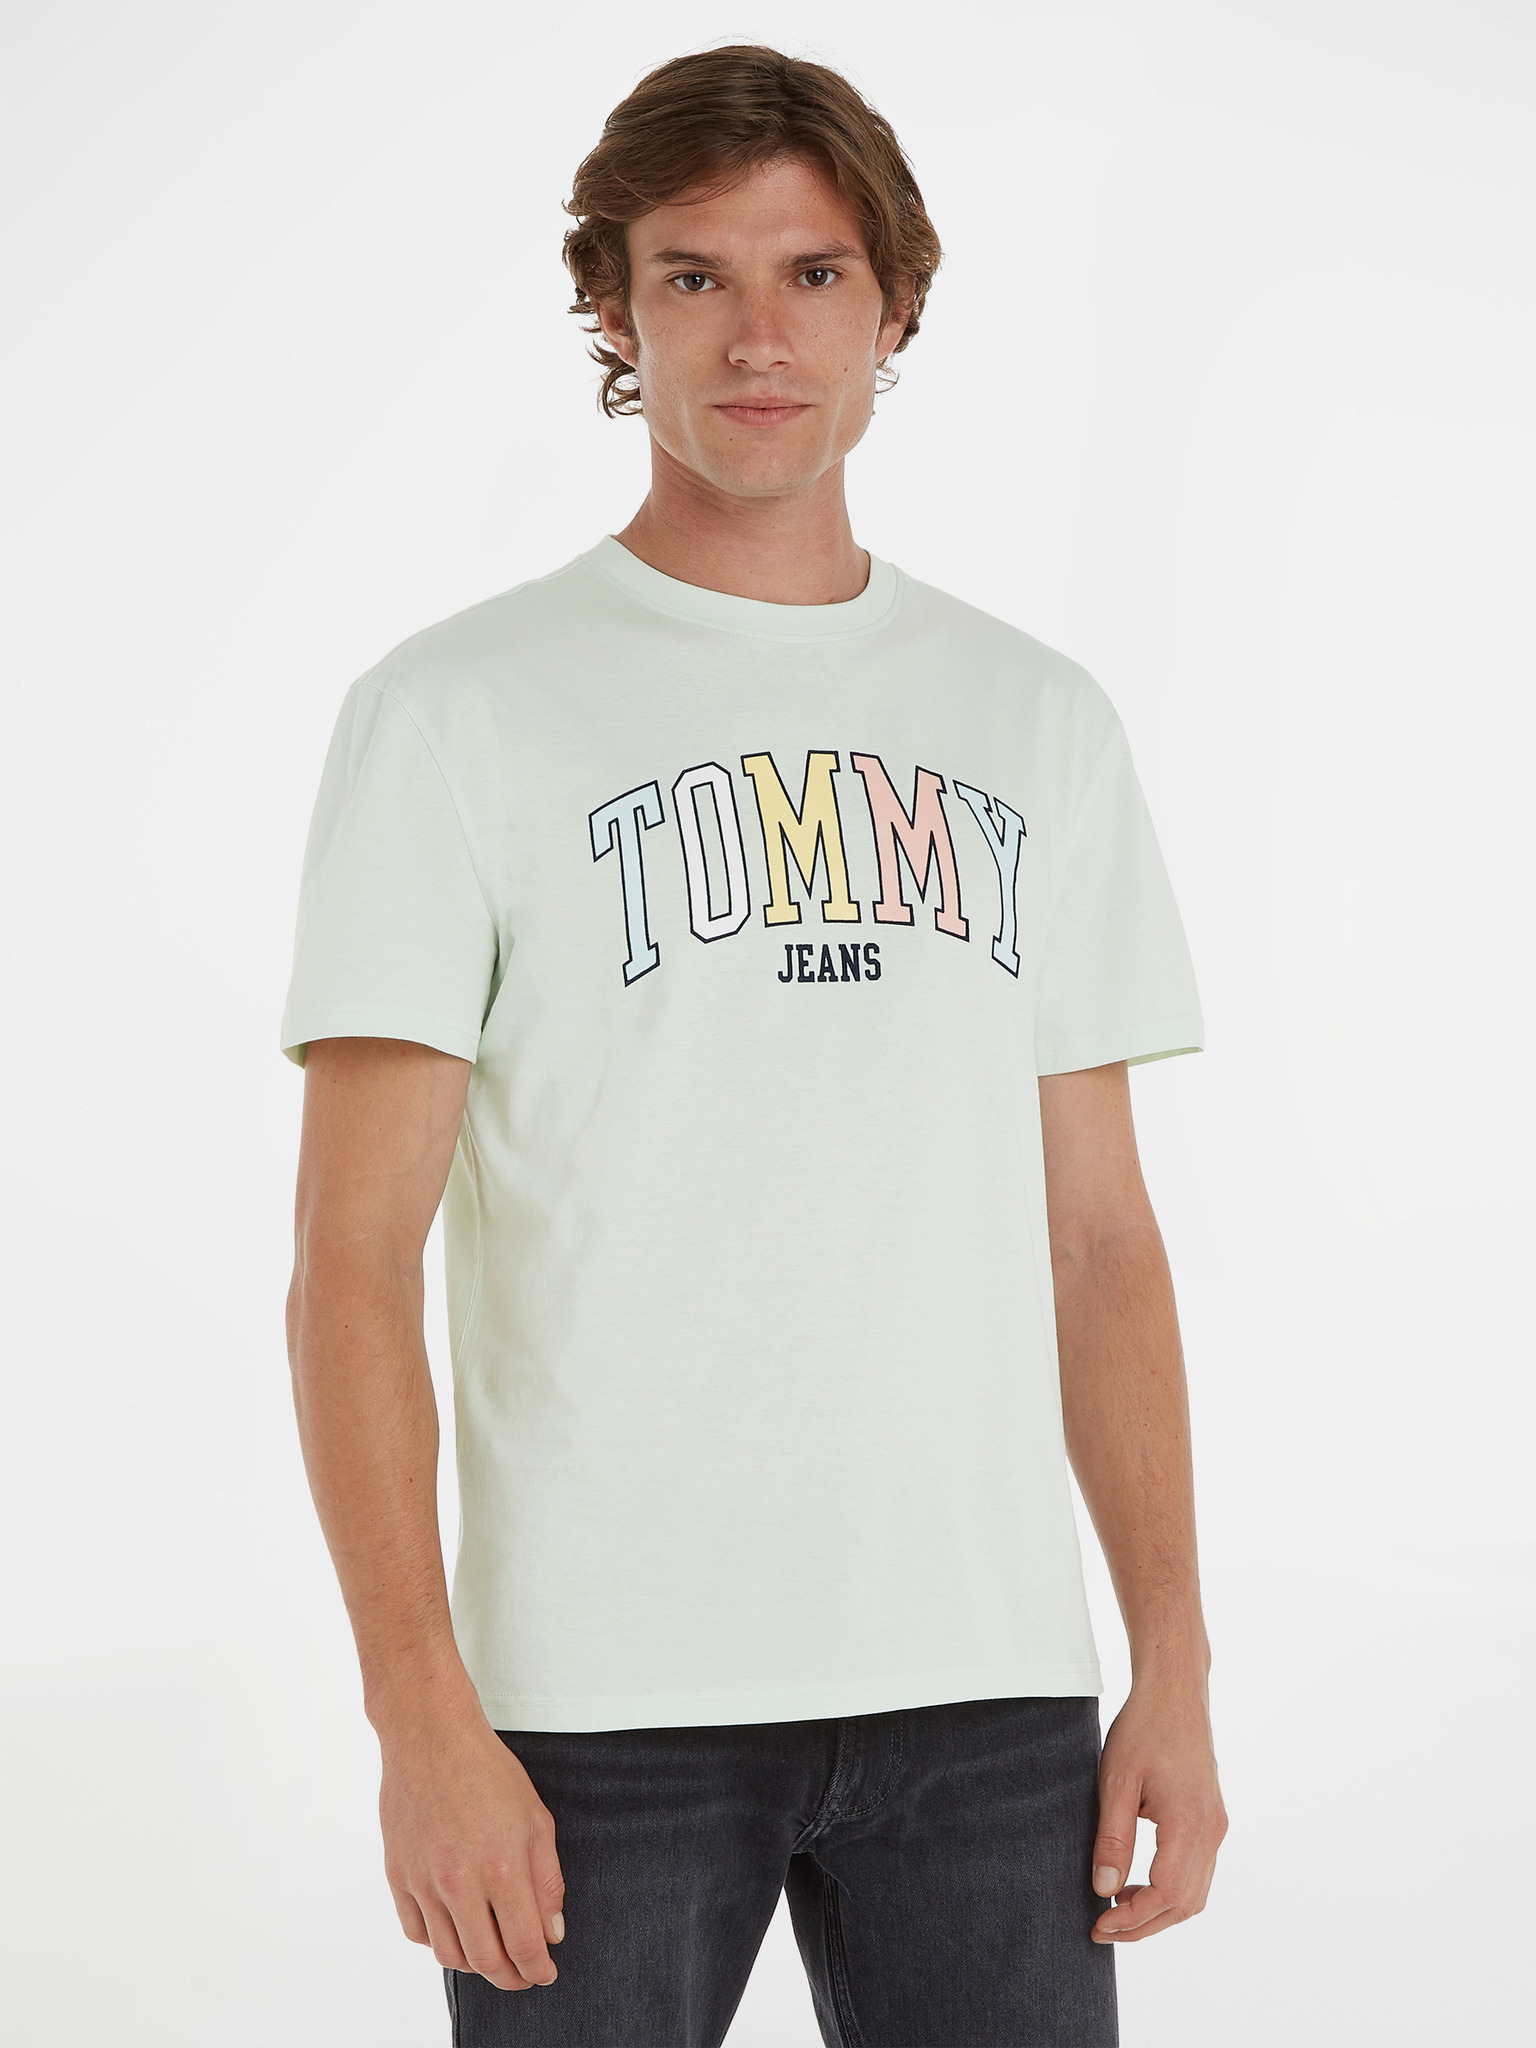 - T-shirt Pop Tommy College Jeans